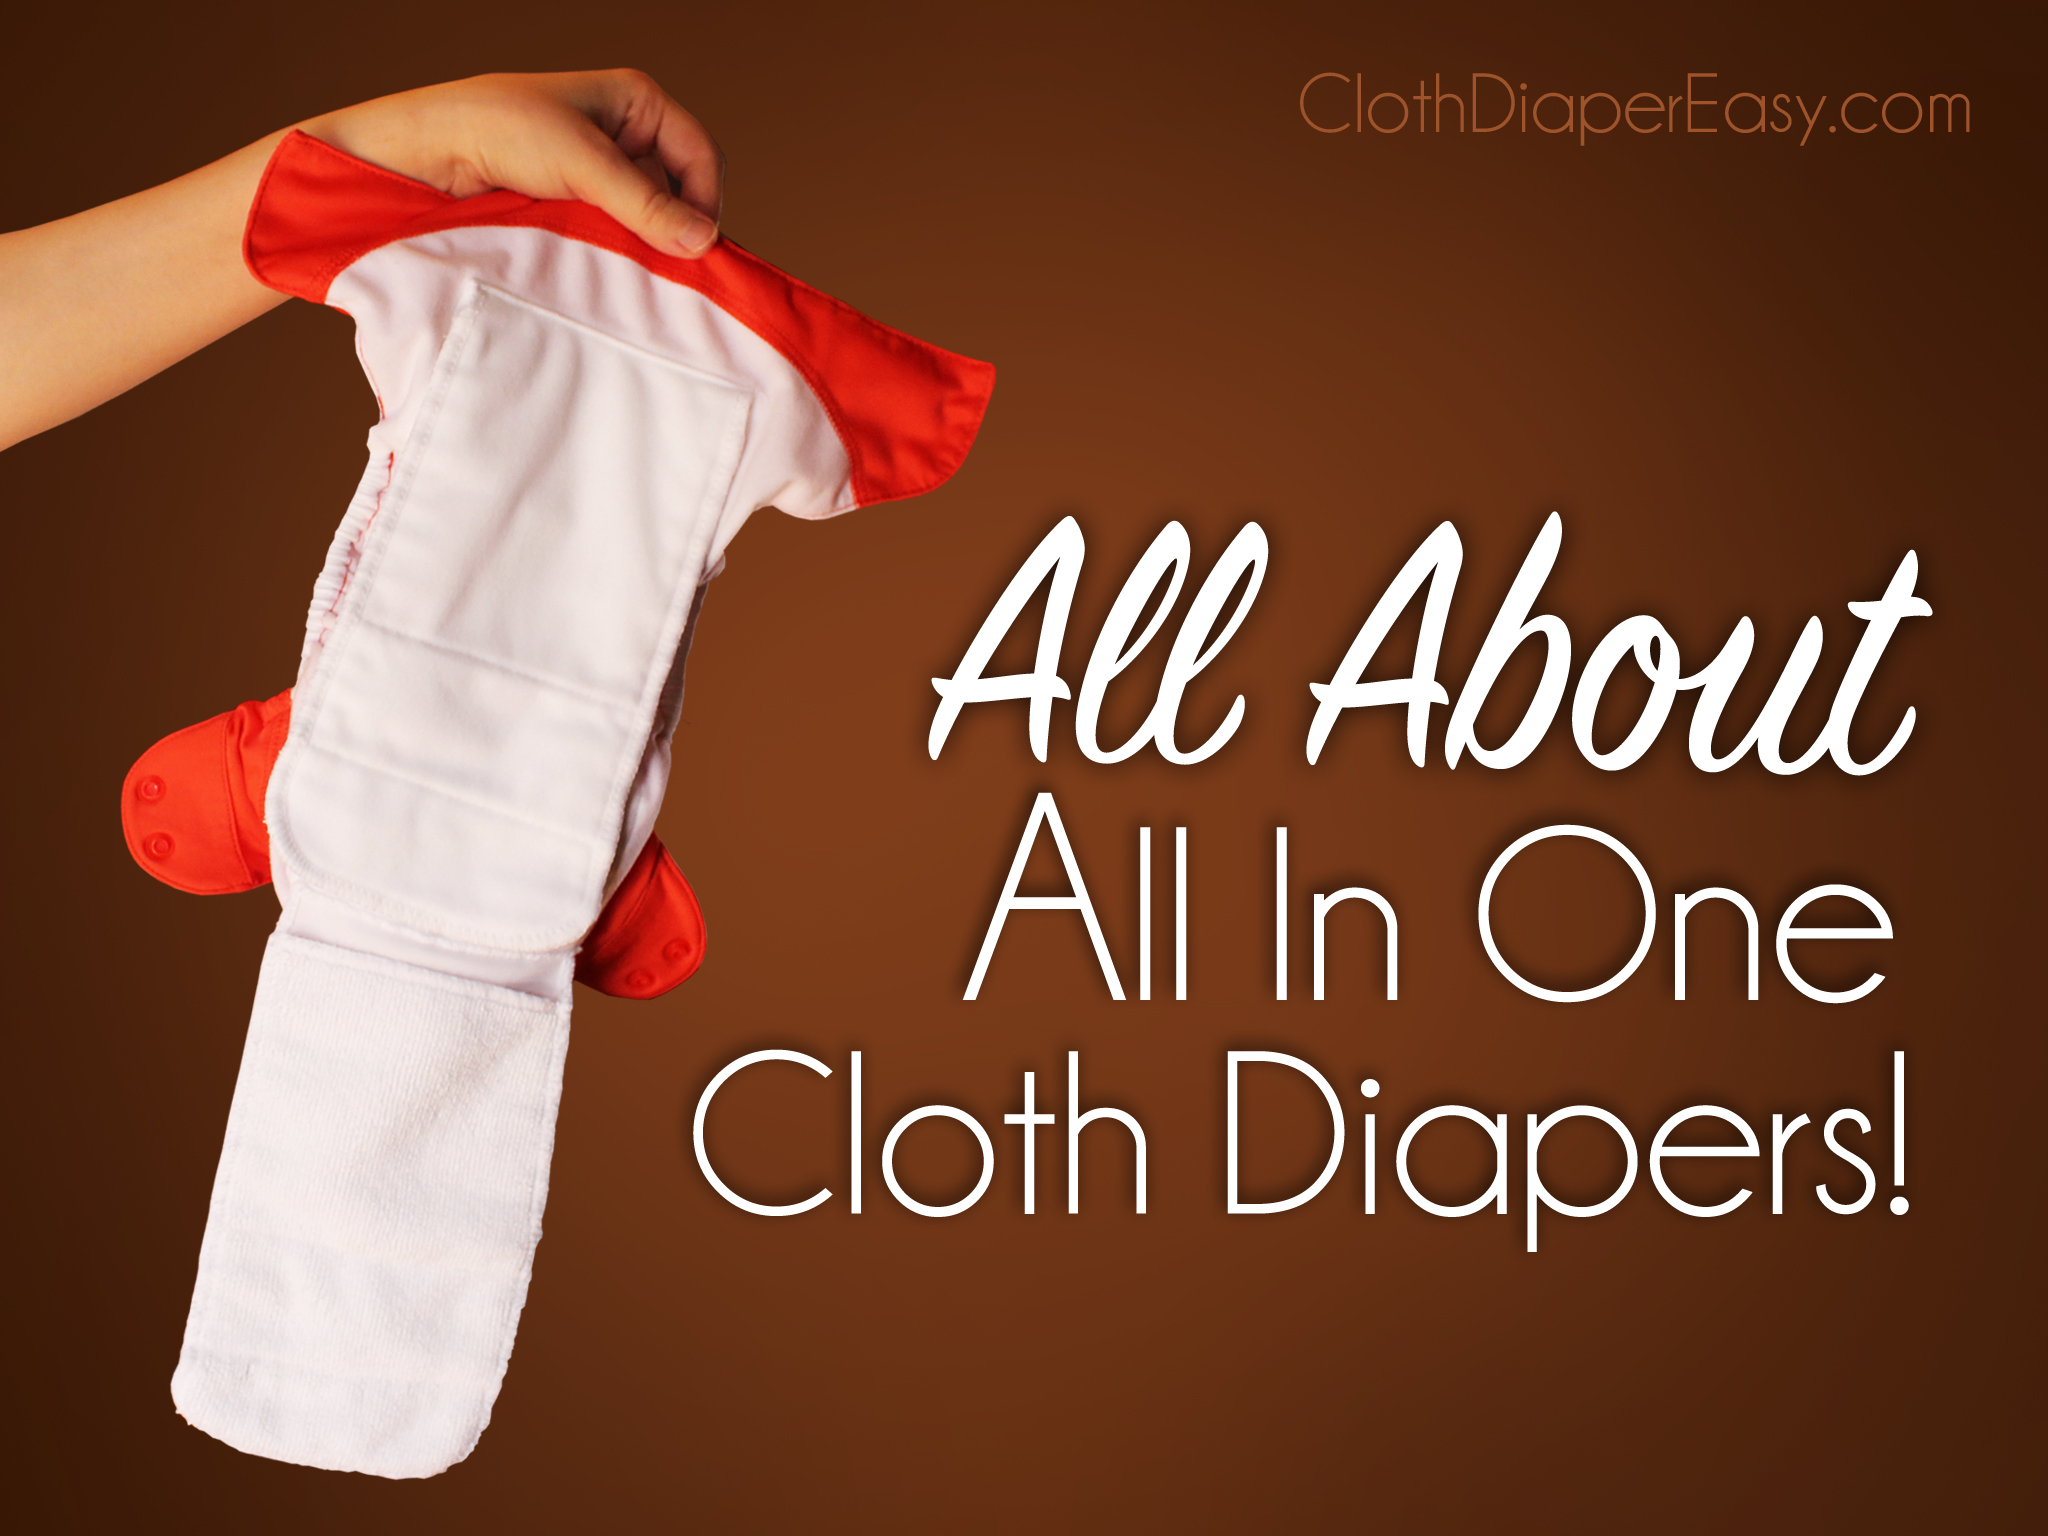 All In One Cloth Diapers